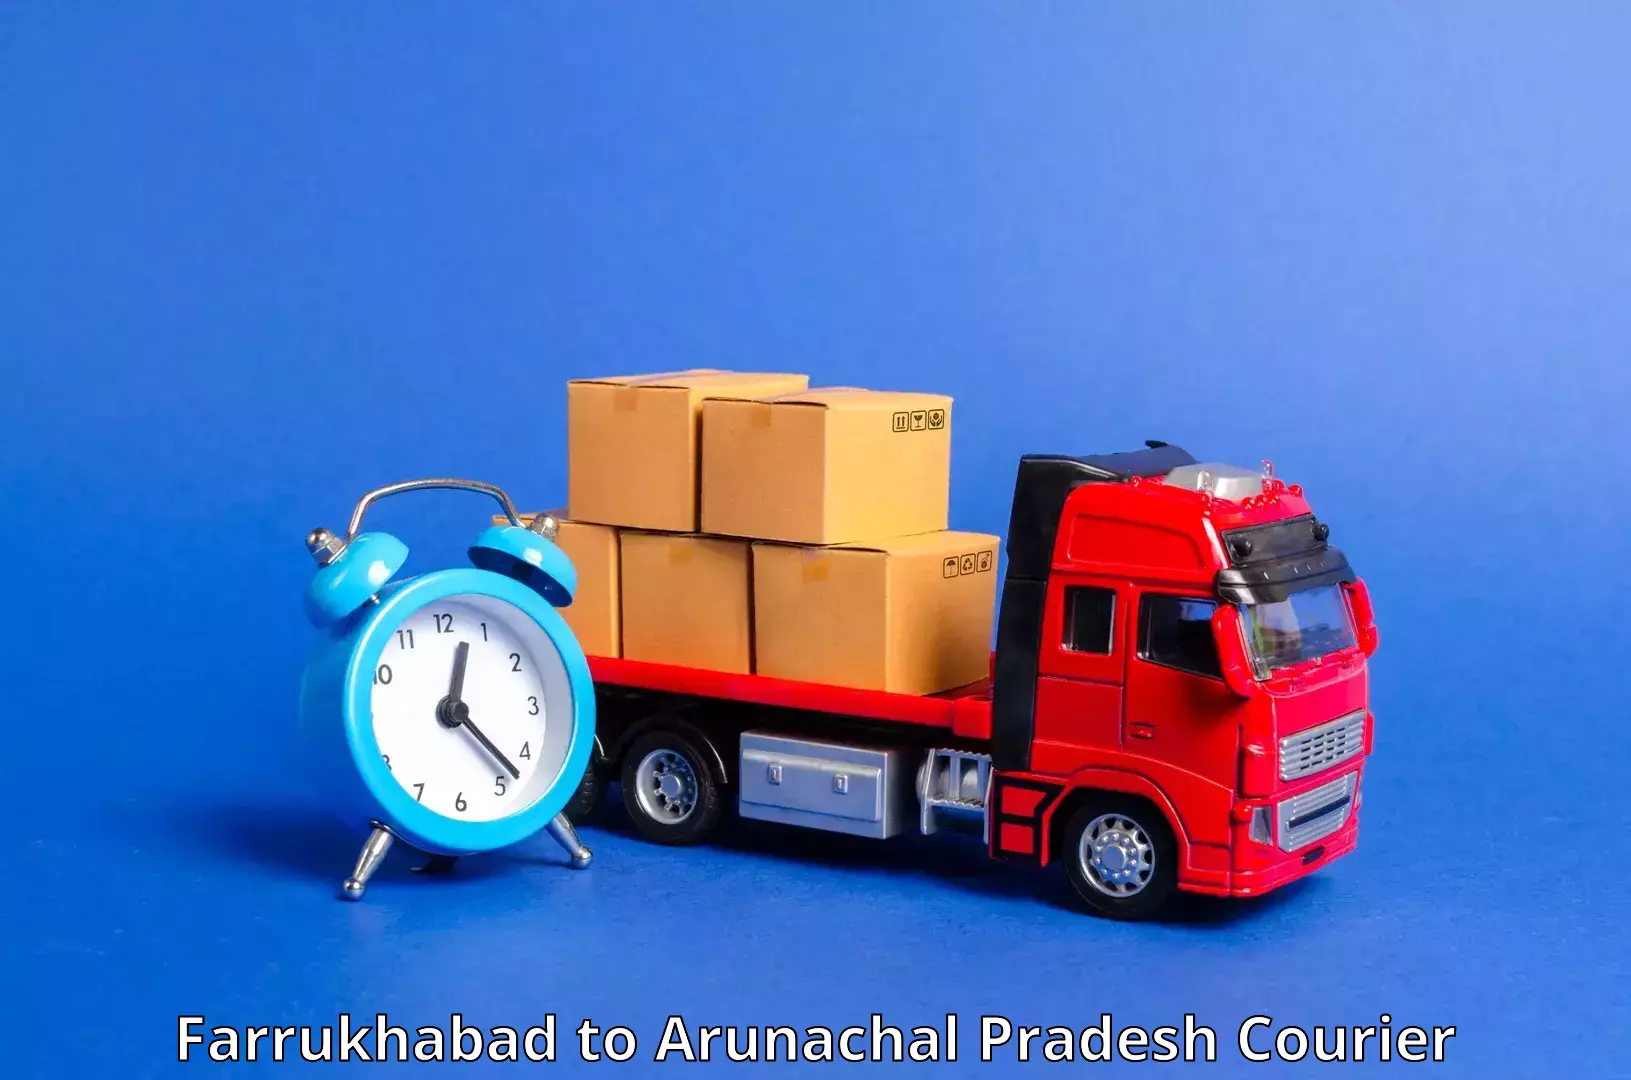 Nationwide delivery network Farrukhabad to Boleng